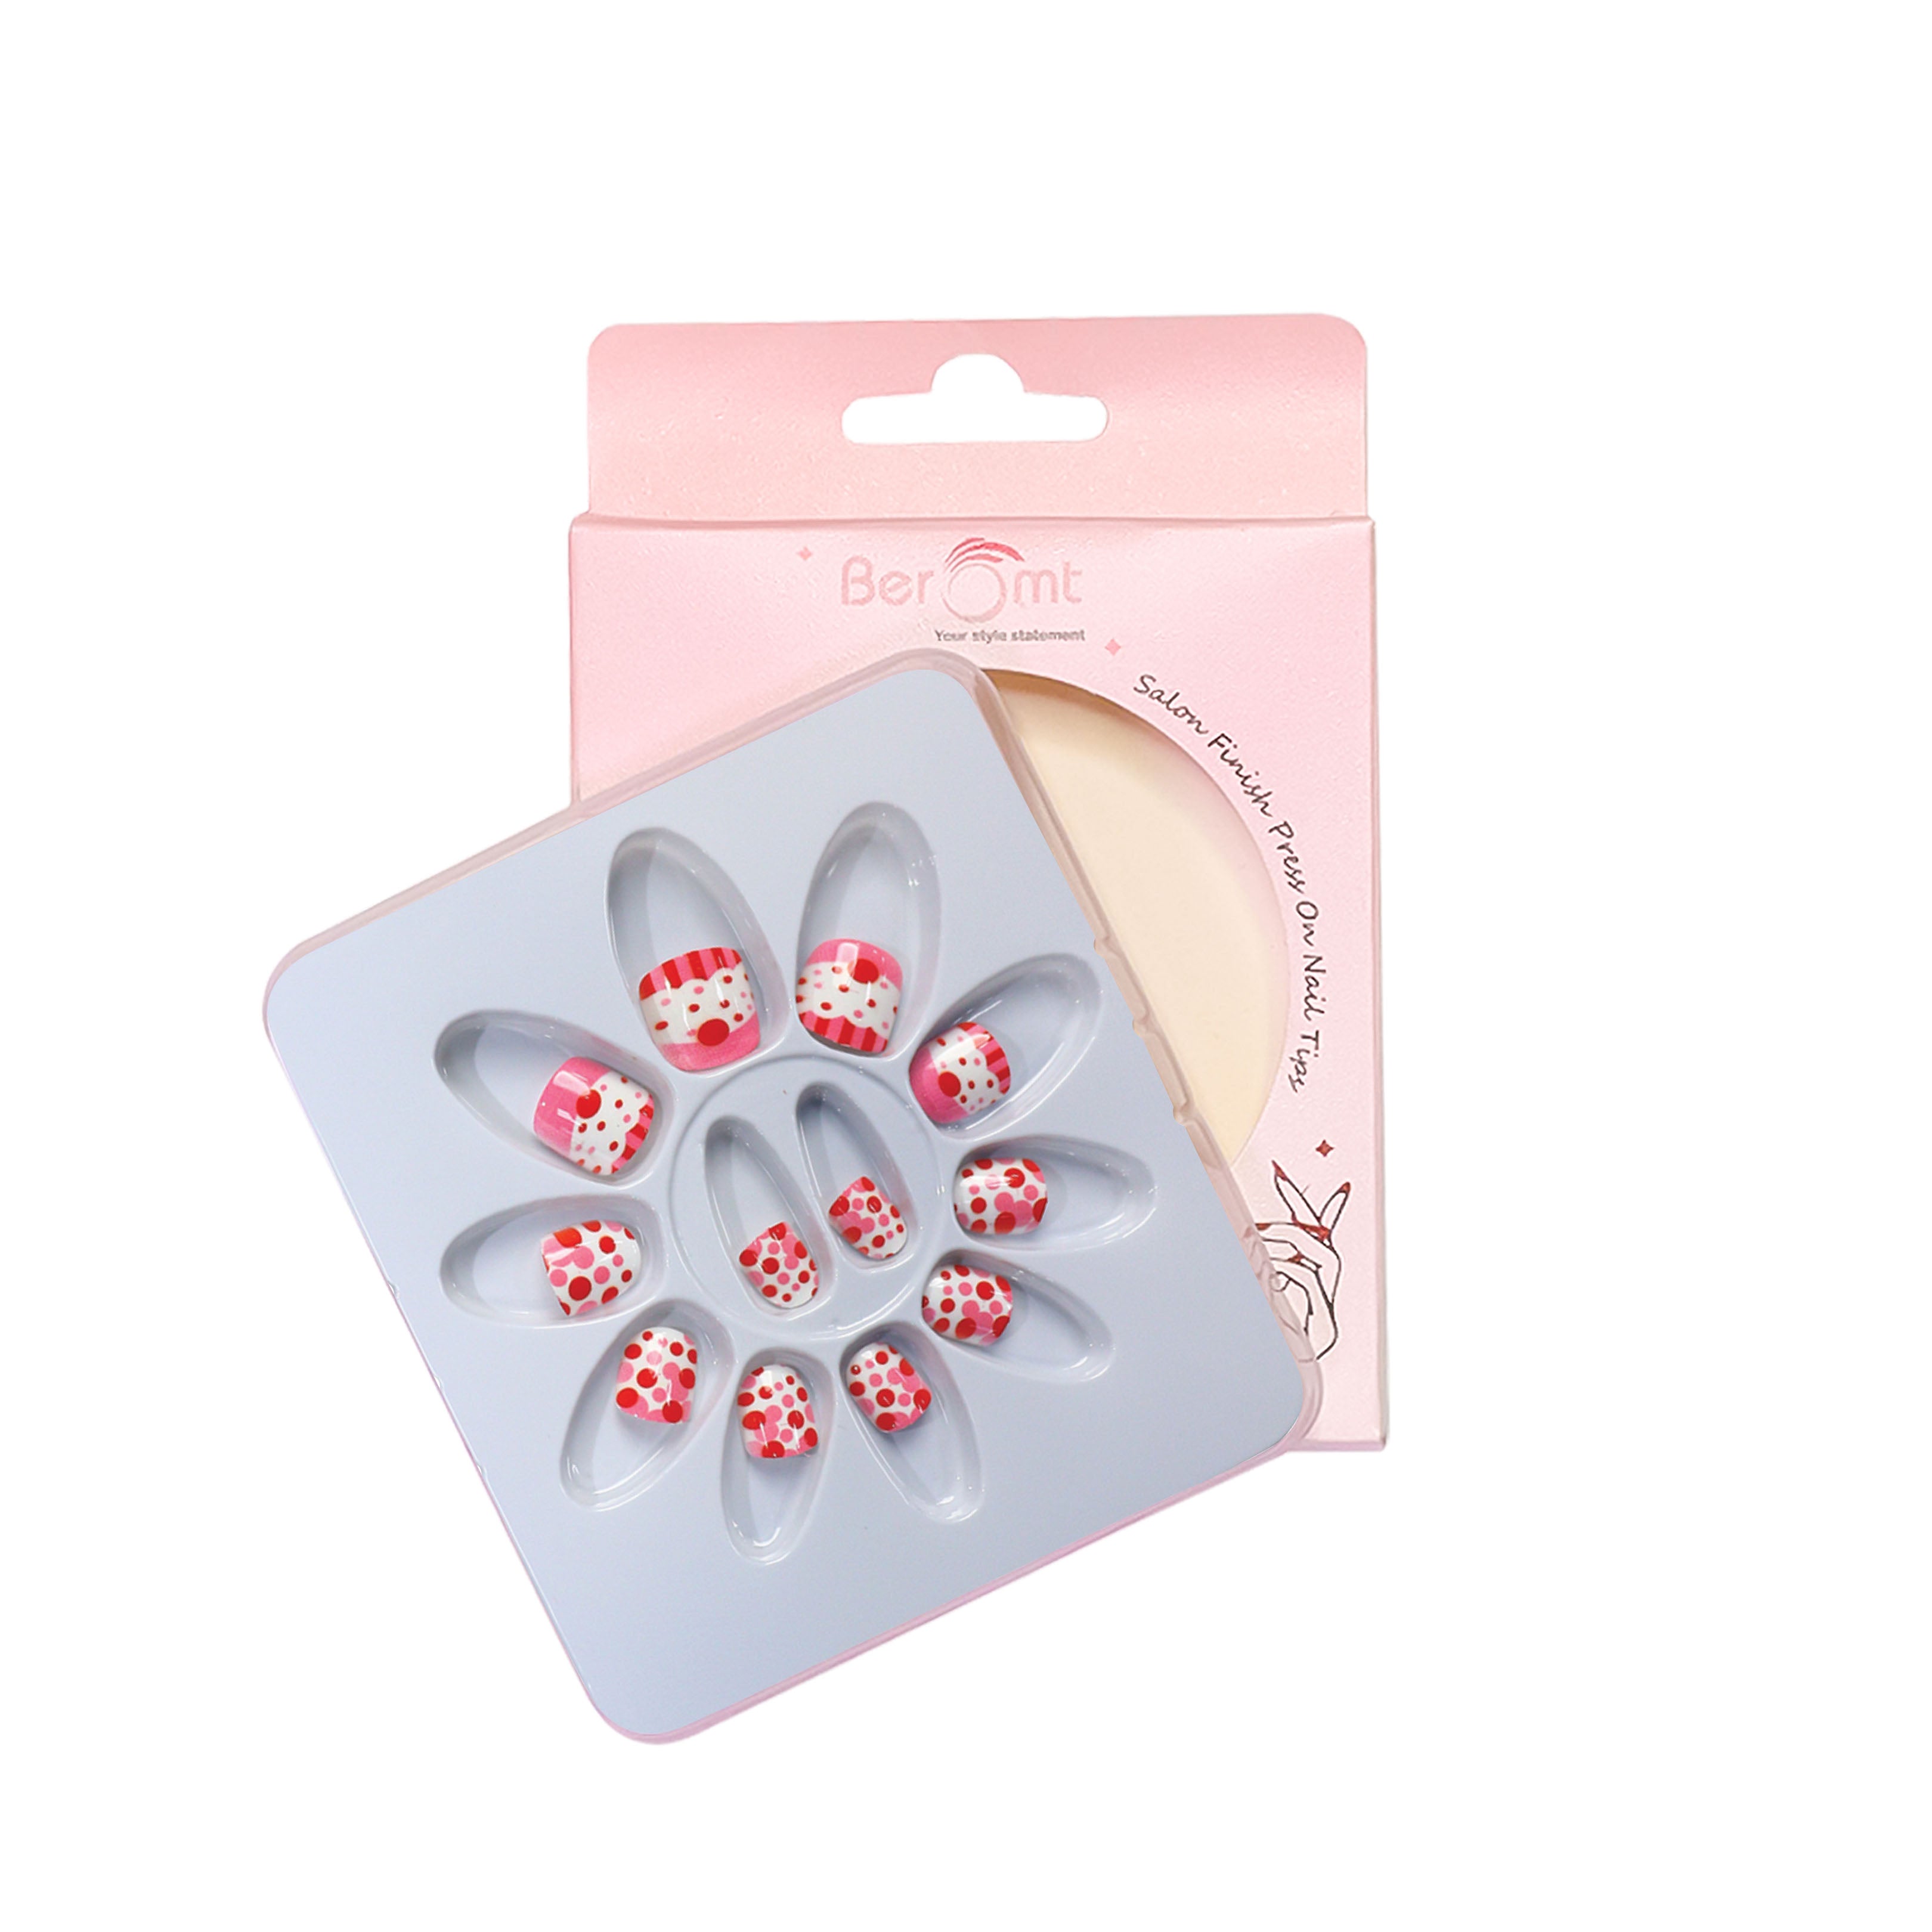 KIDS NAILS - 46 (NAIL KIT INCLUDED)